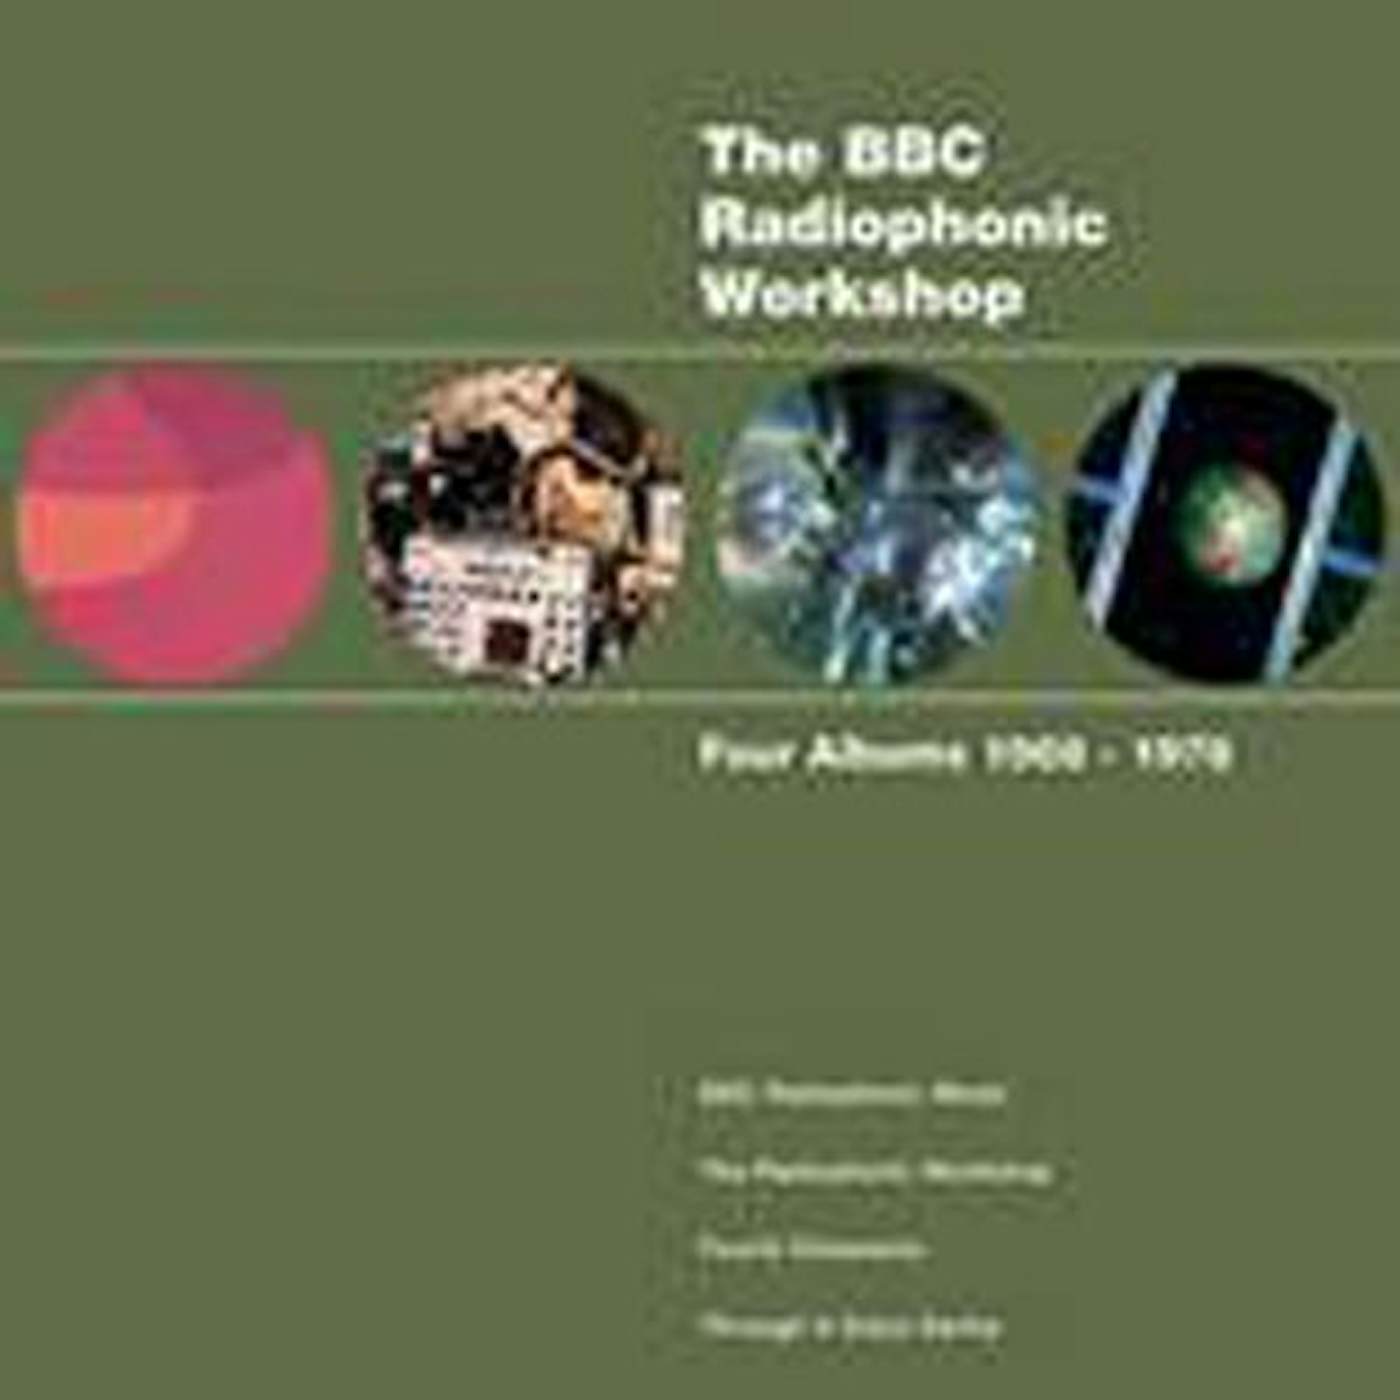 The BBC Radiophonic Workshop FOUR ALBUMS 1968 - 1978 CD